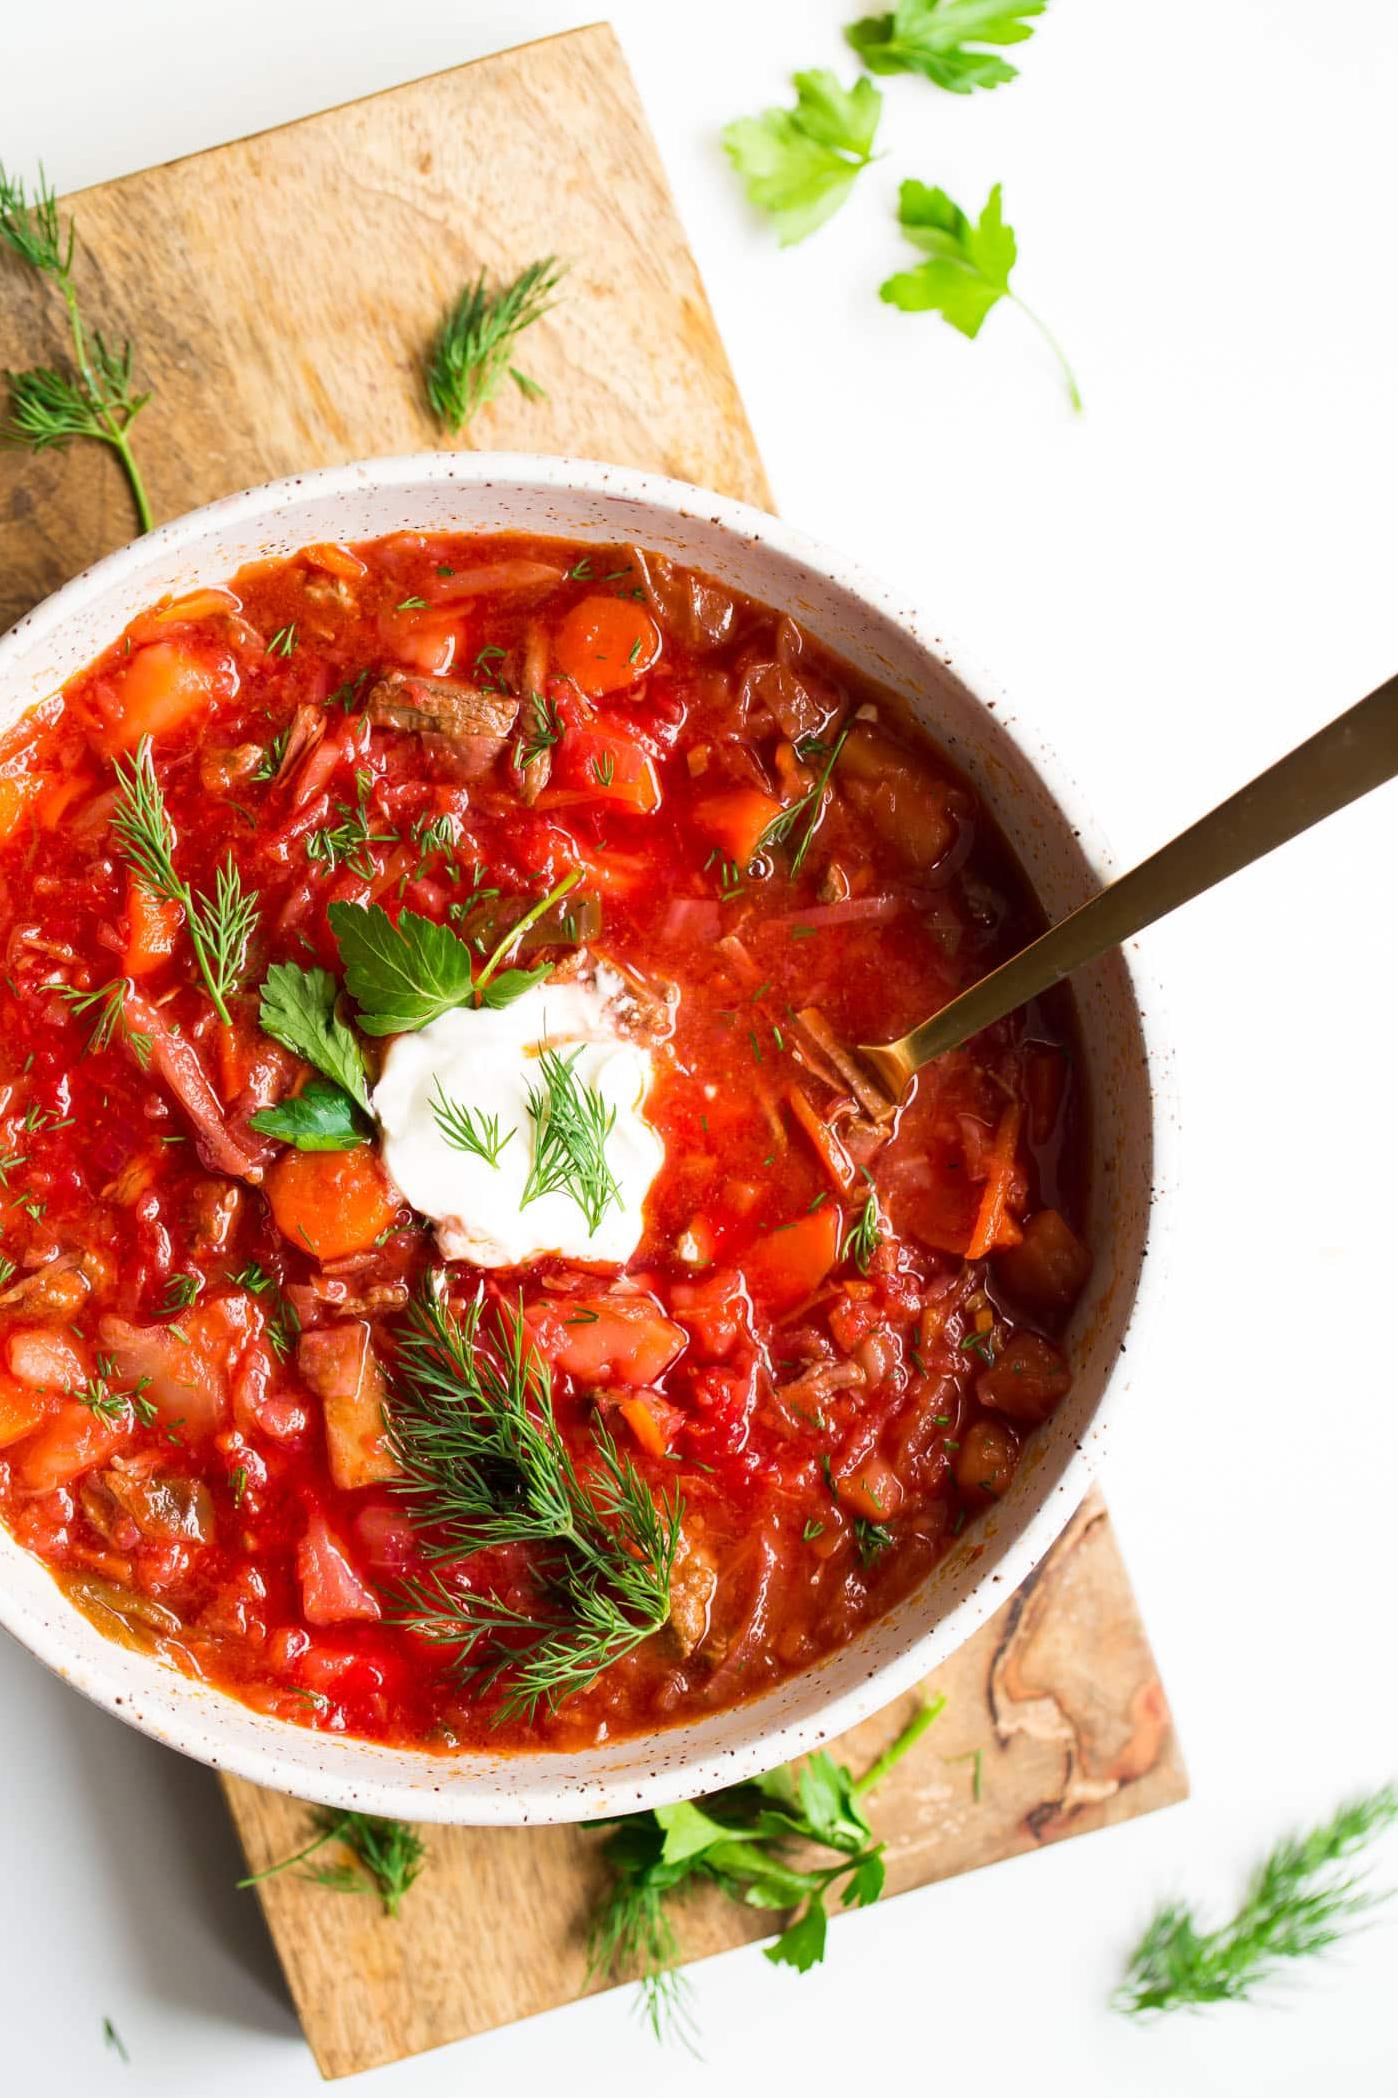  From the Instant Pot to your table, this borscht is ready in no time!